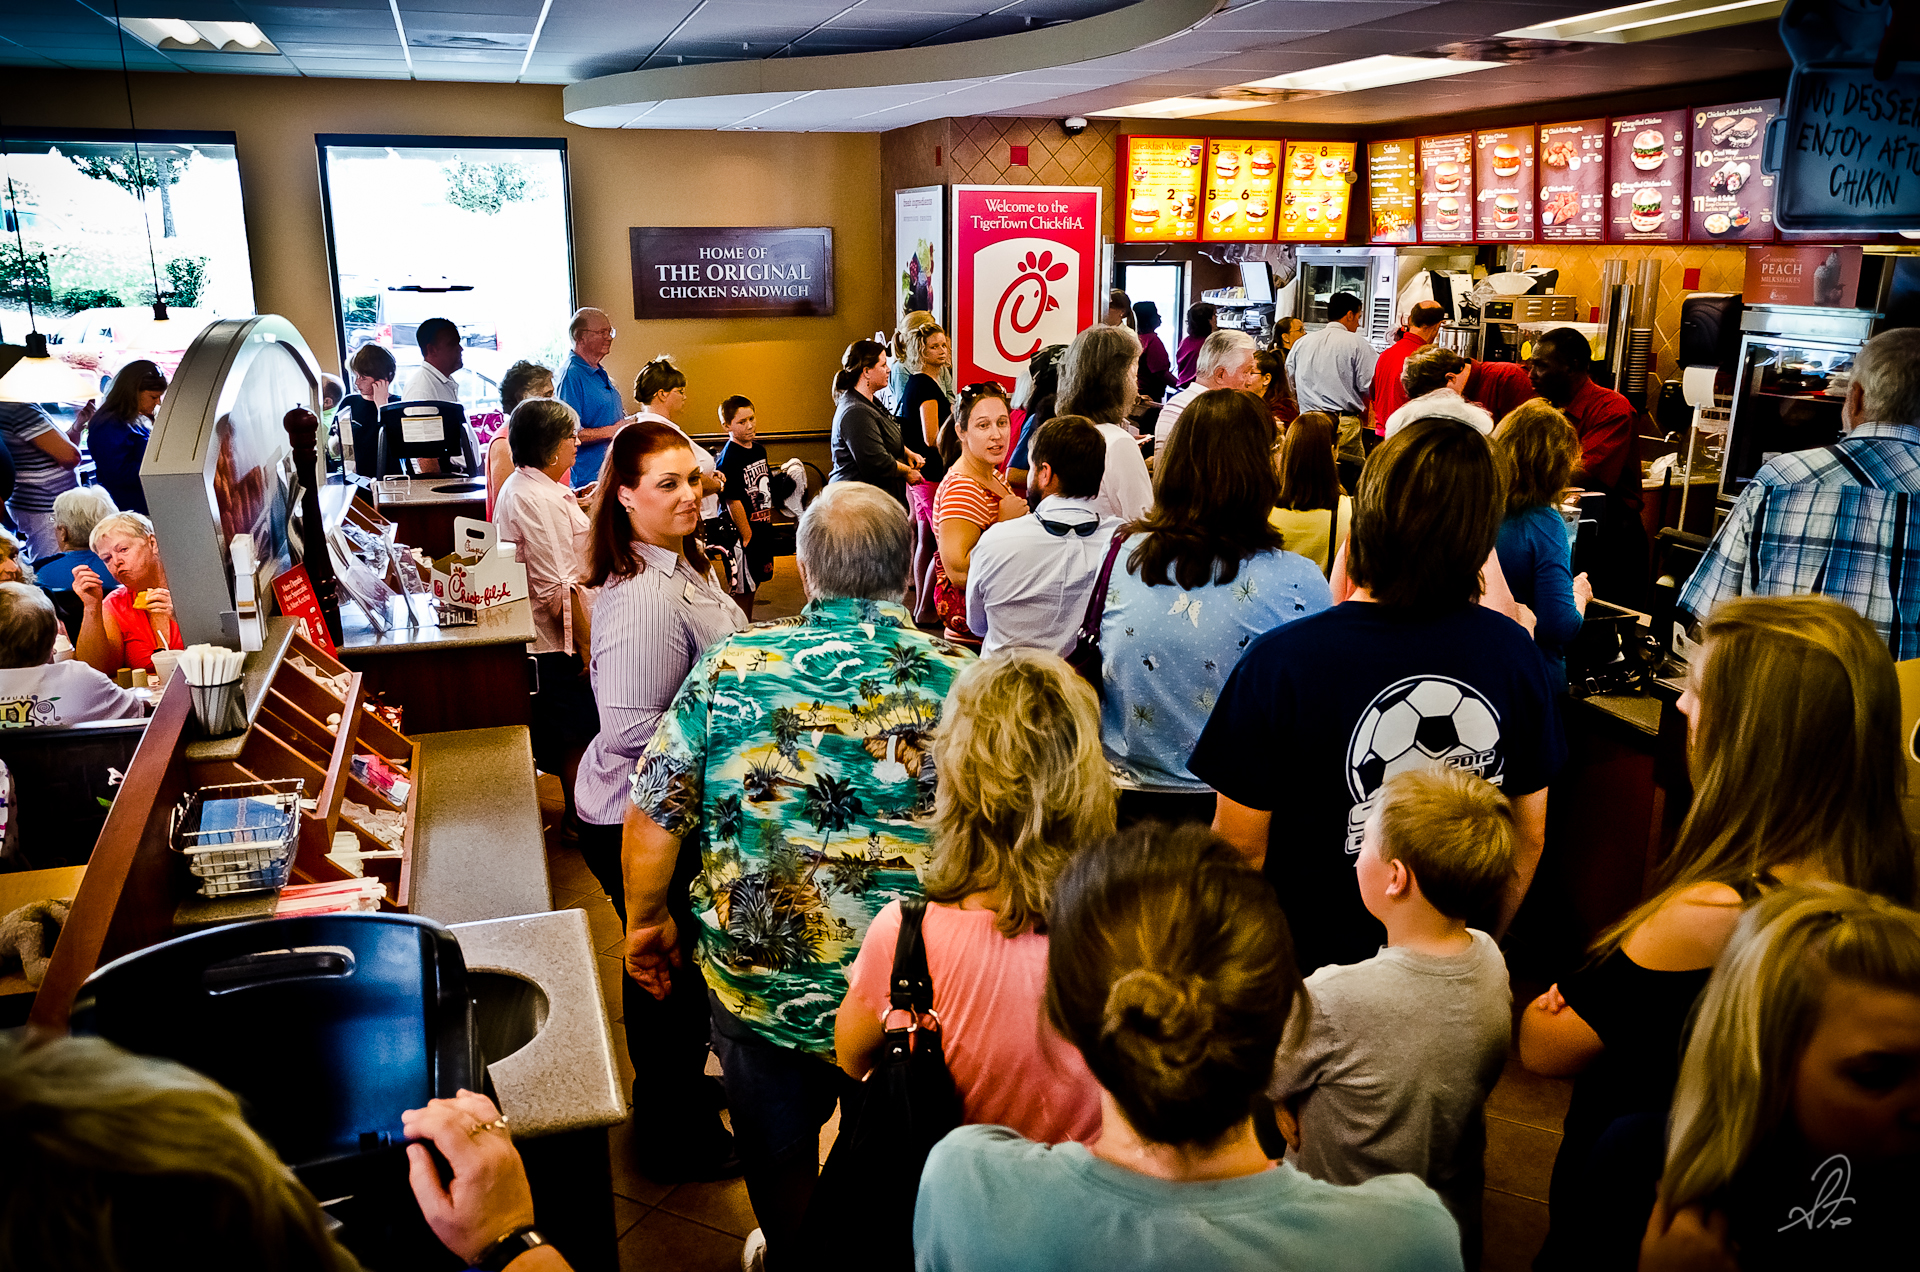 A Look Inside Chick-Fil-A Appreciation Day Brings Opportunity for Christians